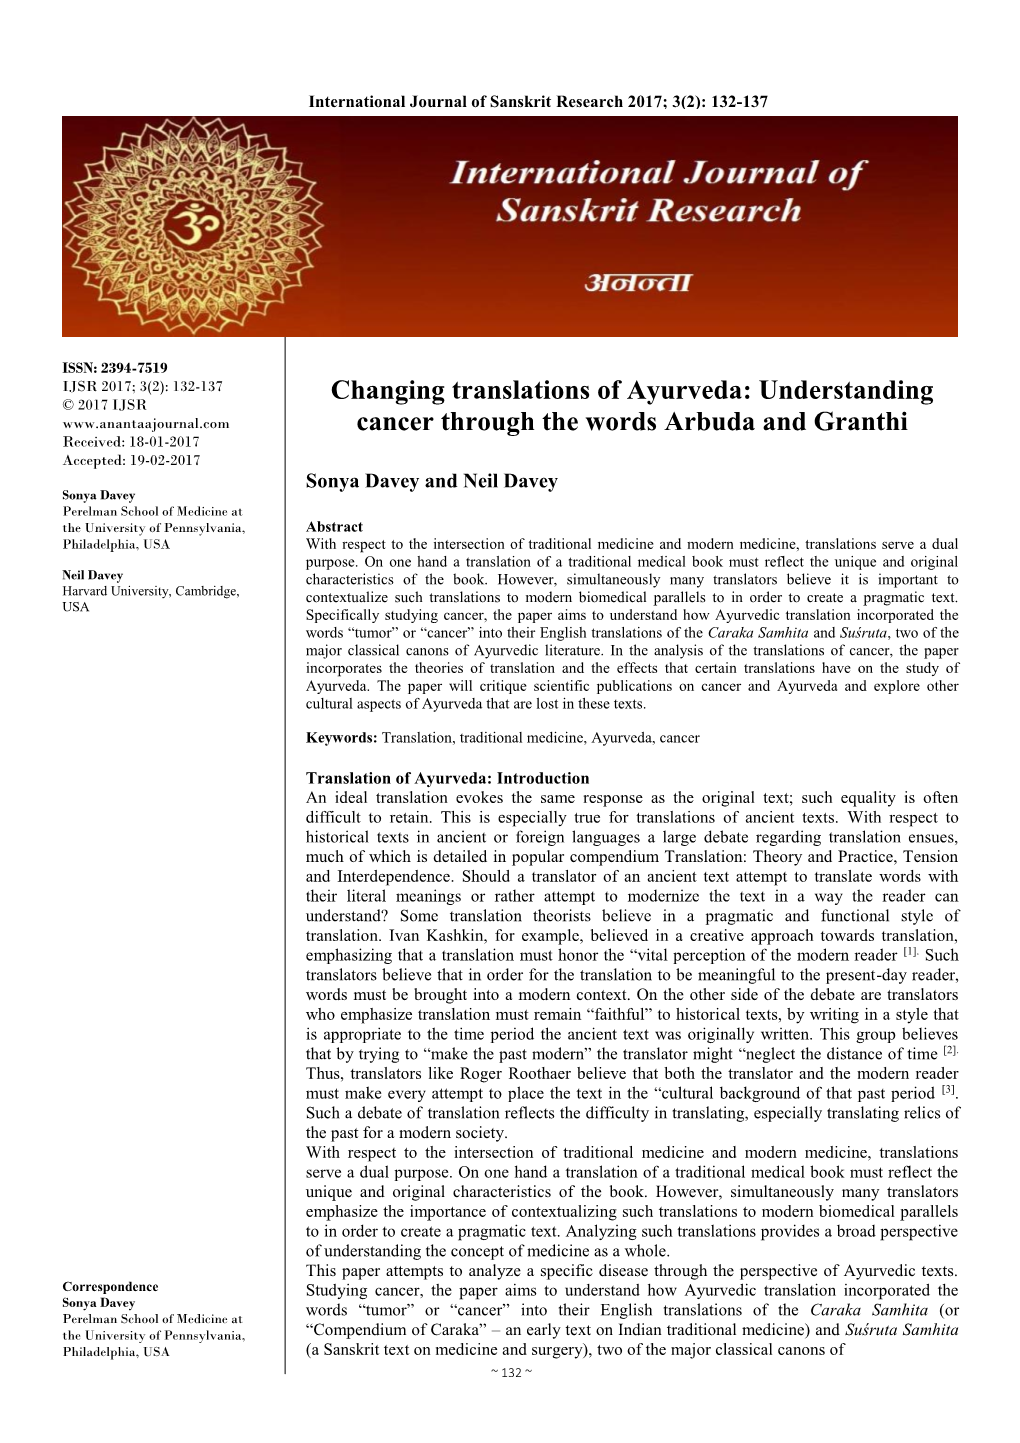 Changing Translations of Ayurveda: Understanding Cancer Through The